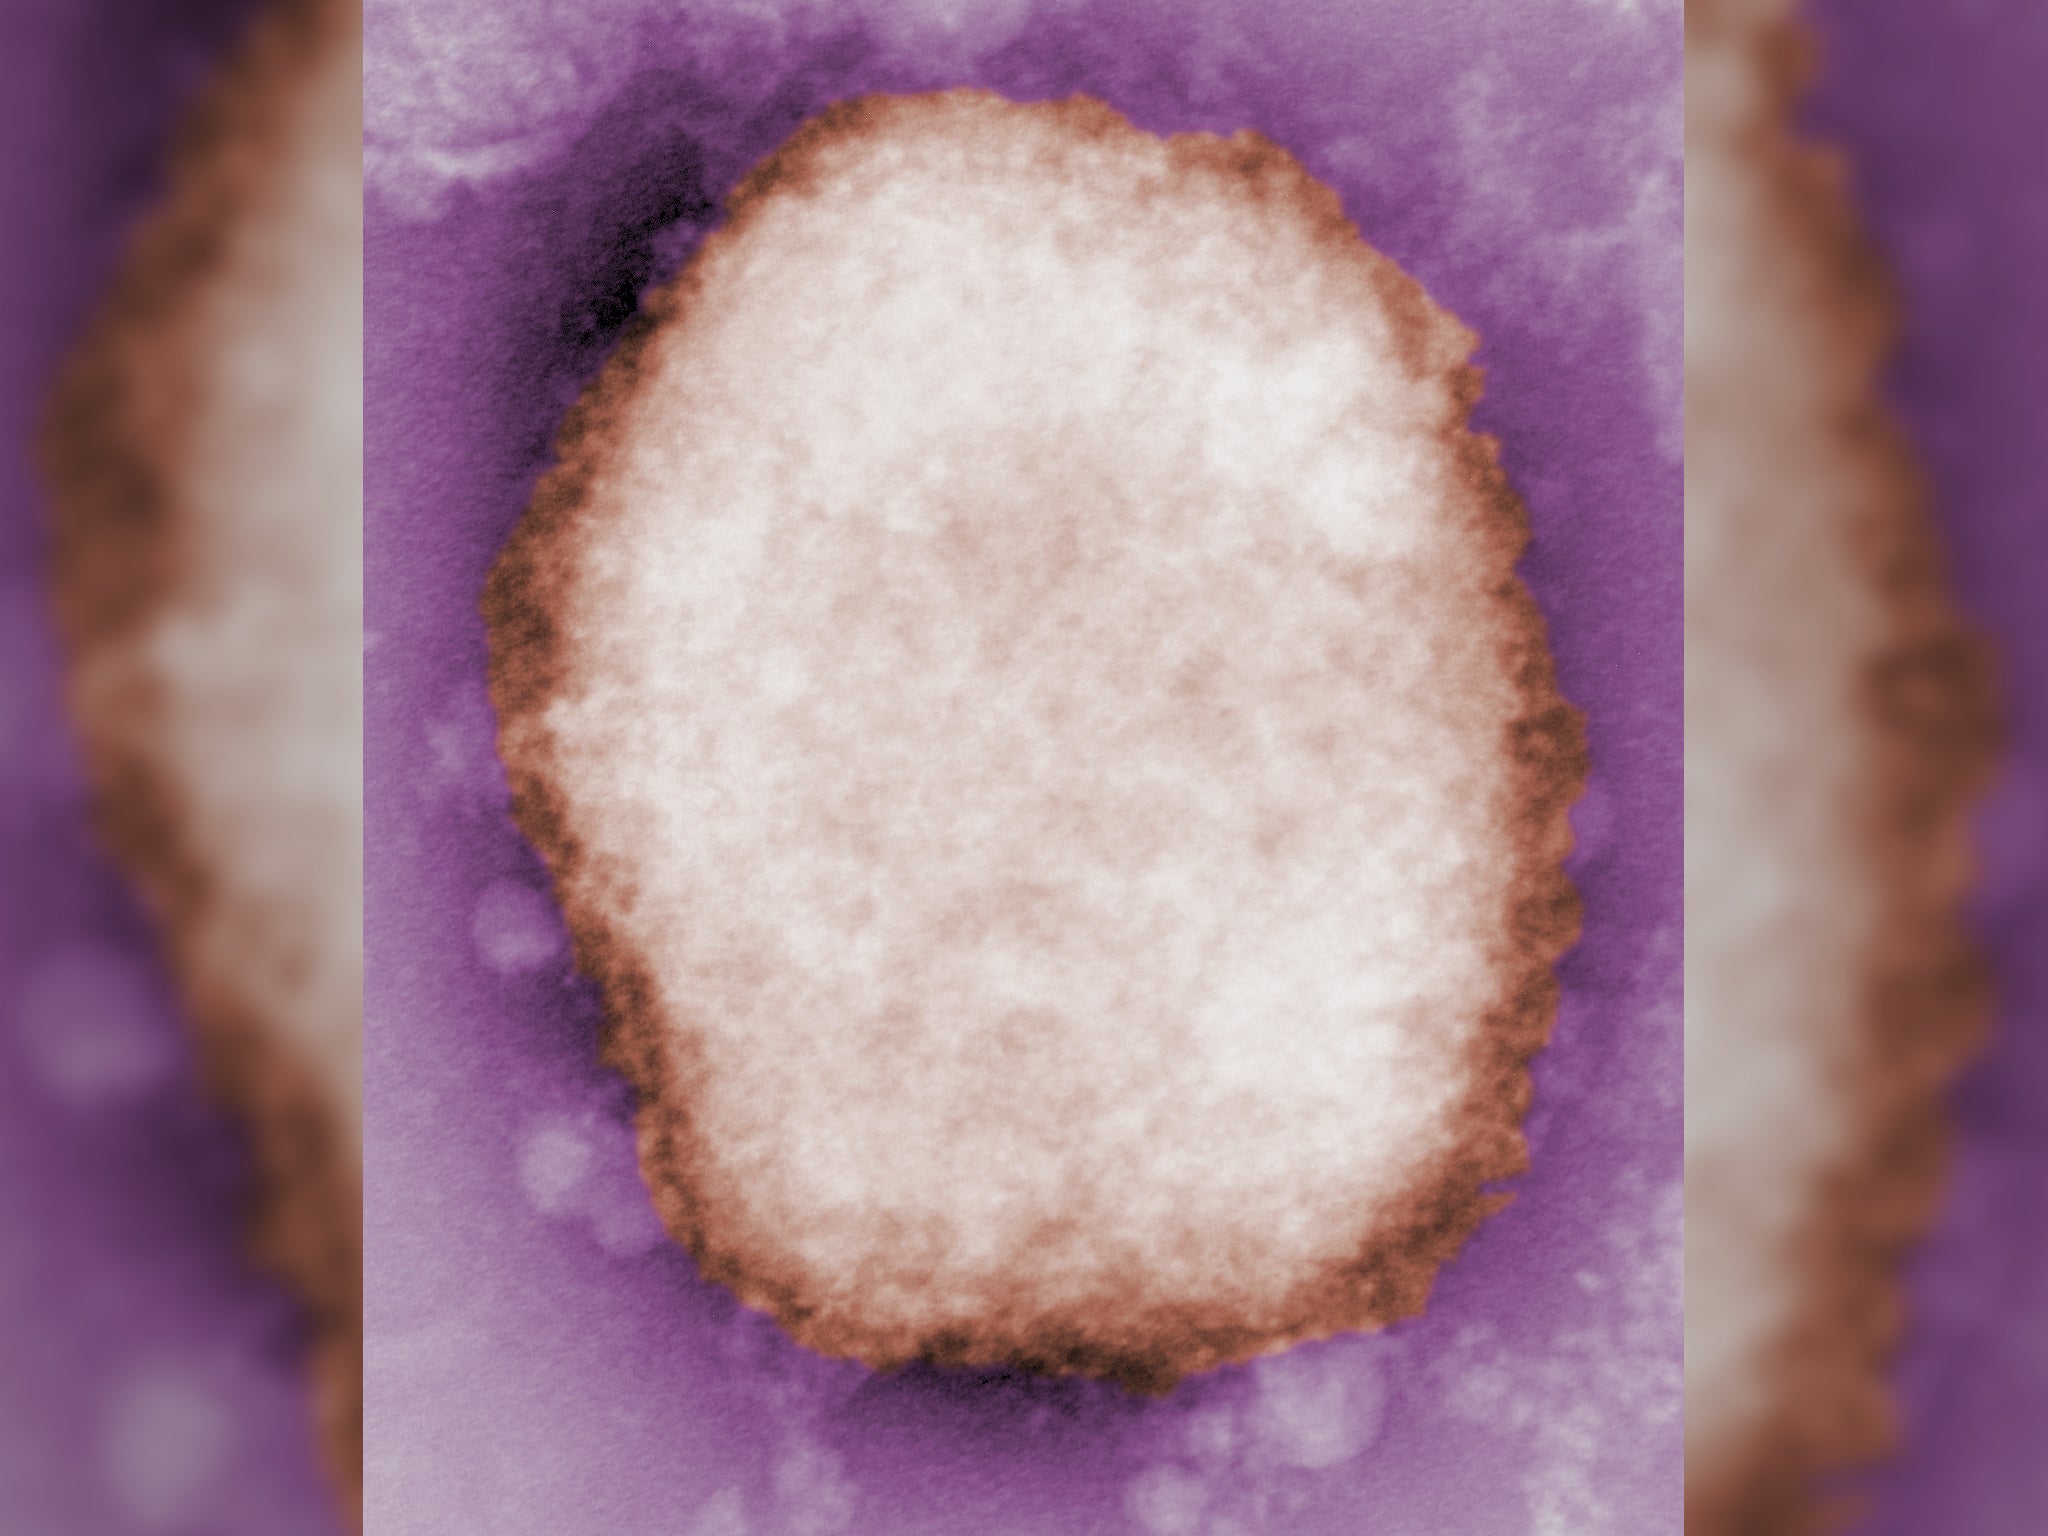 A monkeypox virus particle viewed under a microscope